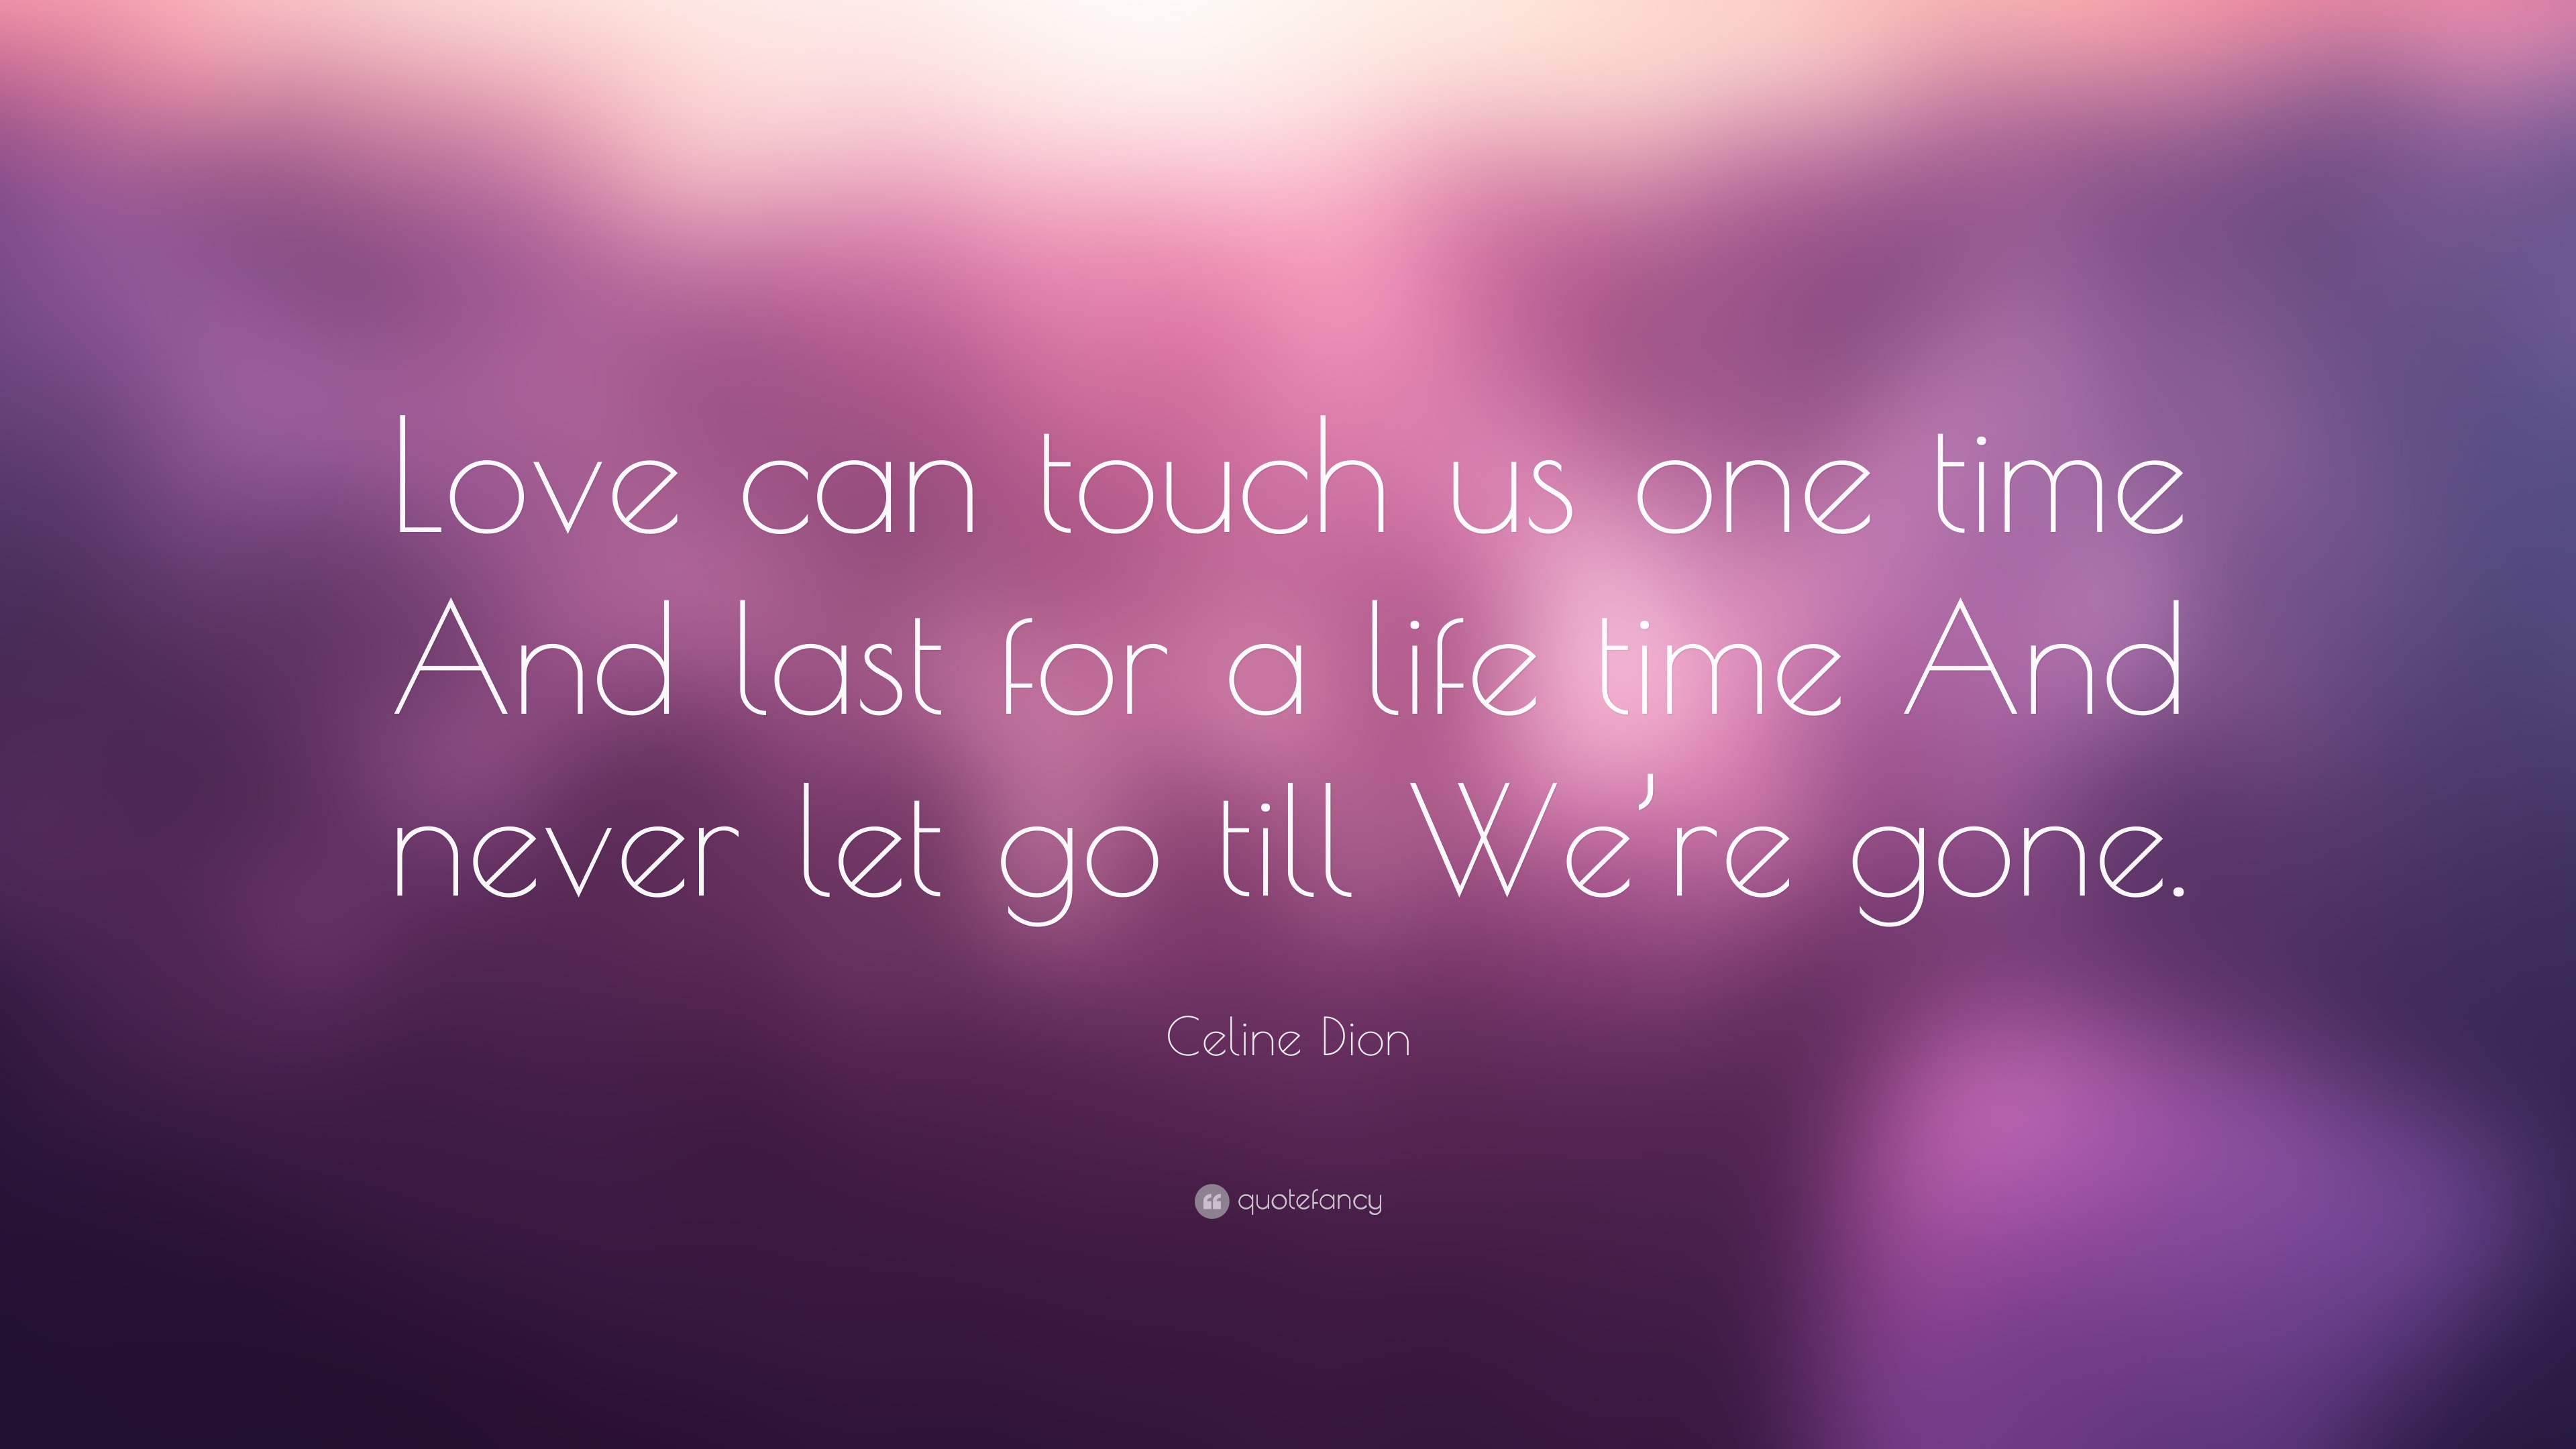 Celine Dion Quote “Love can touch us one time And last for a life